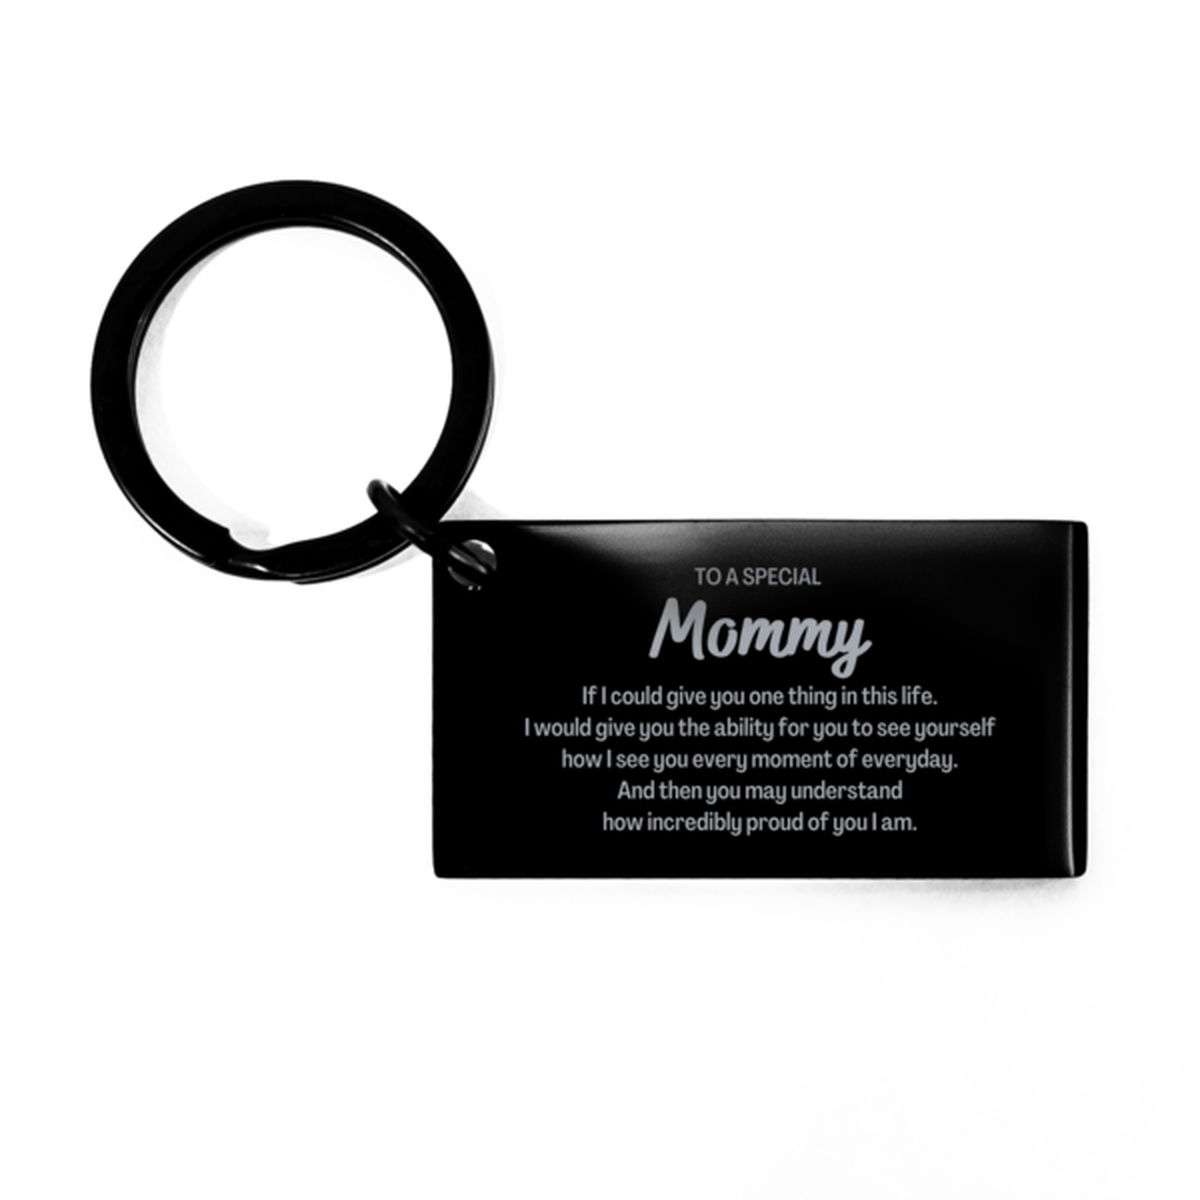 To My Mommy Keychain, Gifts For Mommy Engraved, Inspirational Gifts for Christmas Birthday, Epic Gifts for Mommy To A Special Mommy how incredibly proud of you I am